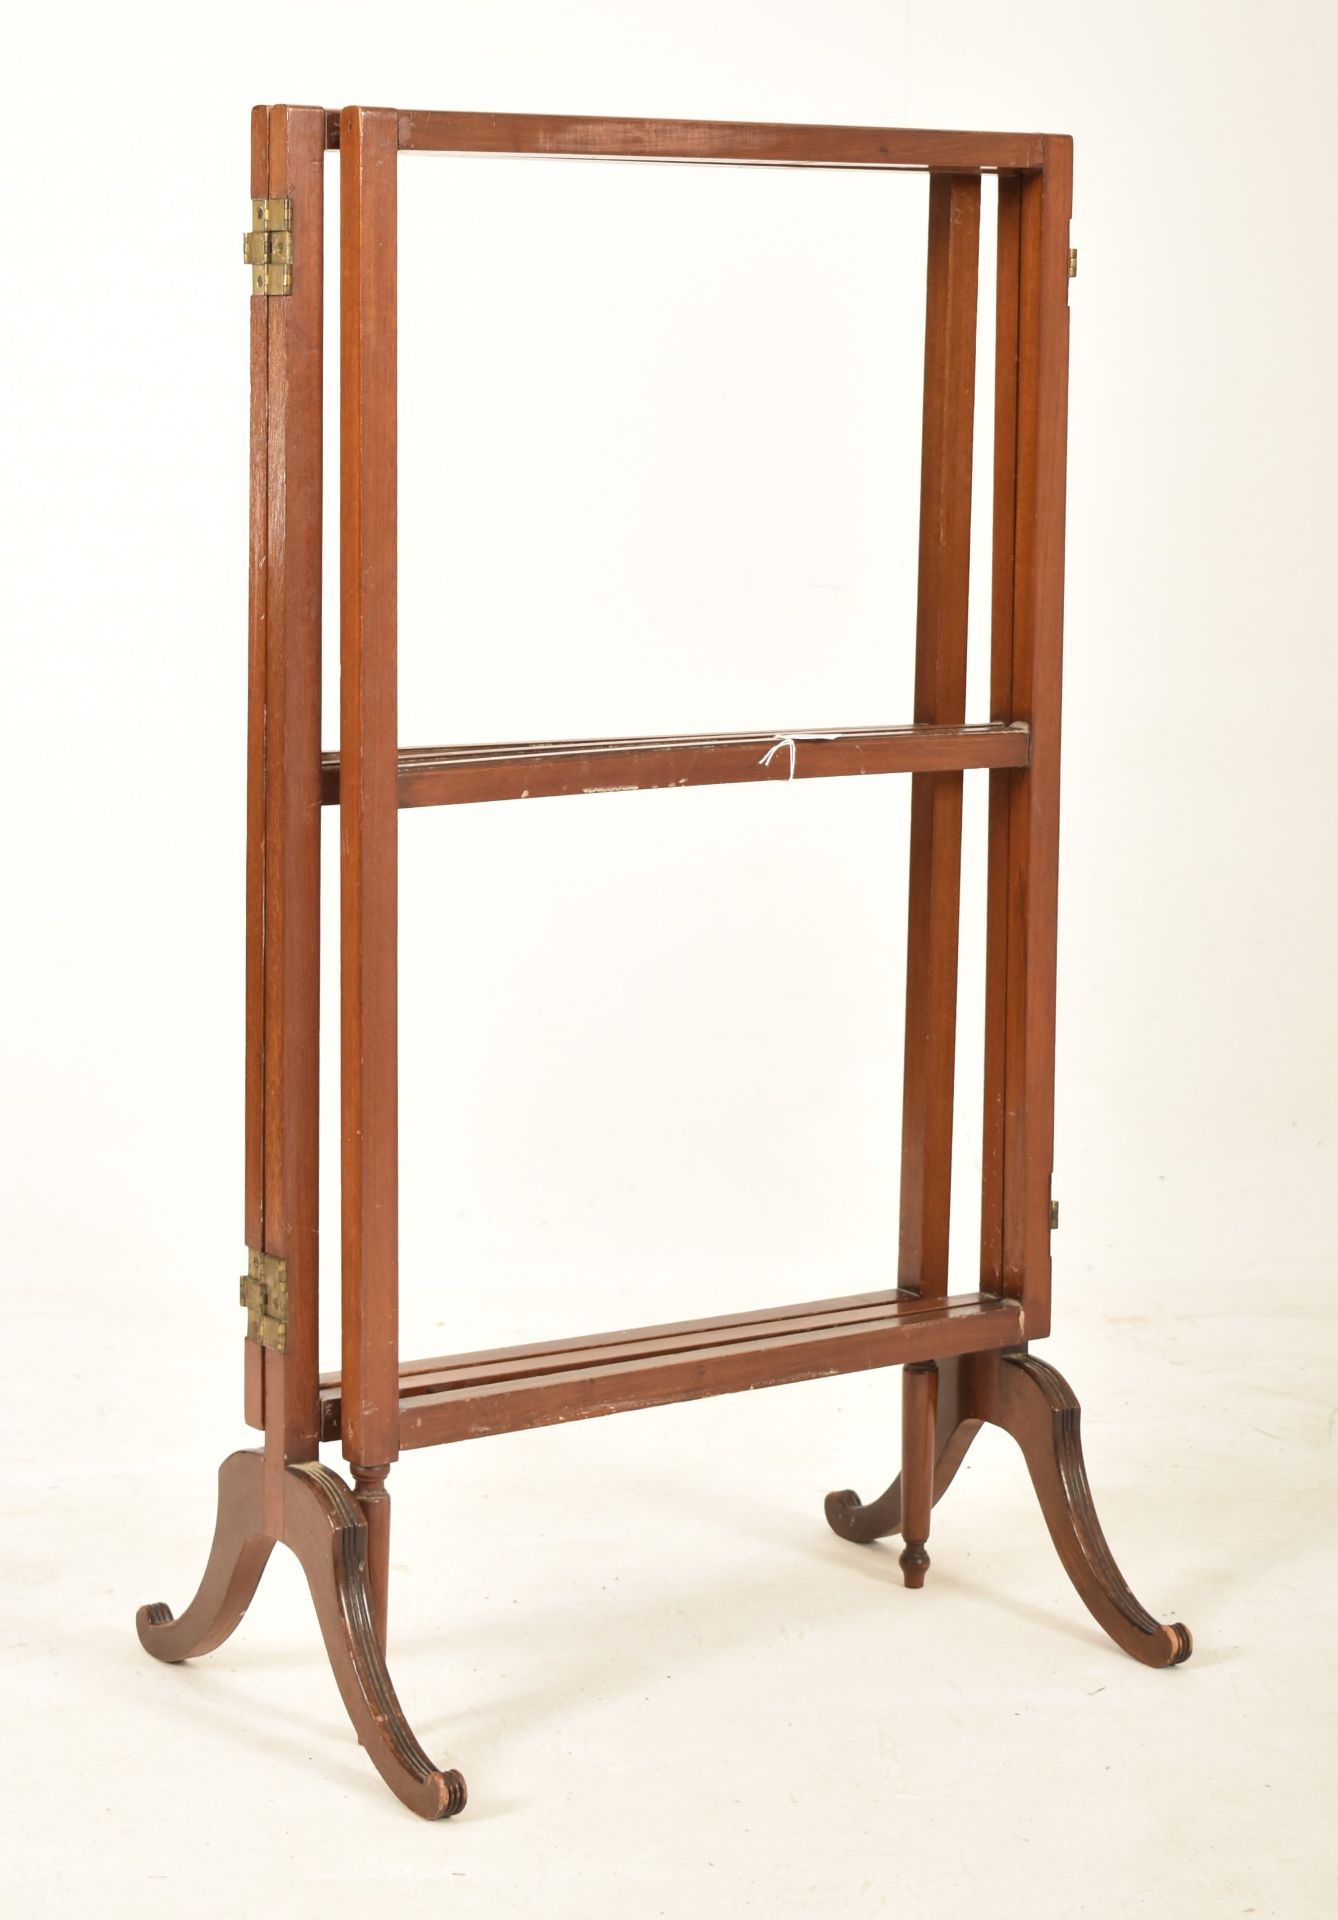 EDWARDIAN MAHOGANY CLOTHES HORSE IN THREE SECTIONS